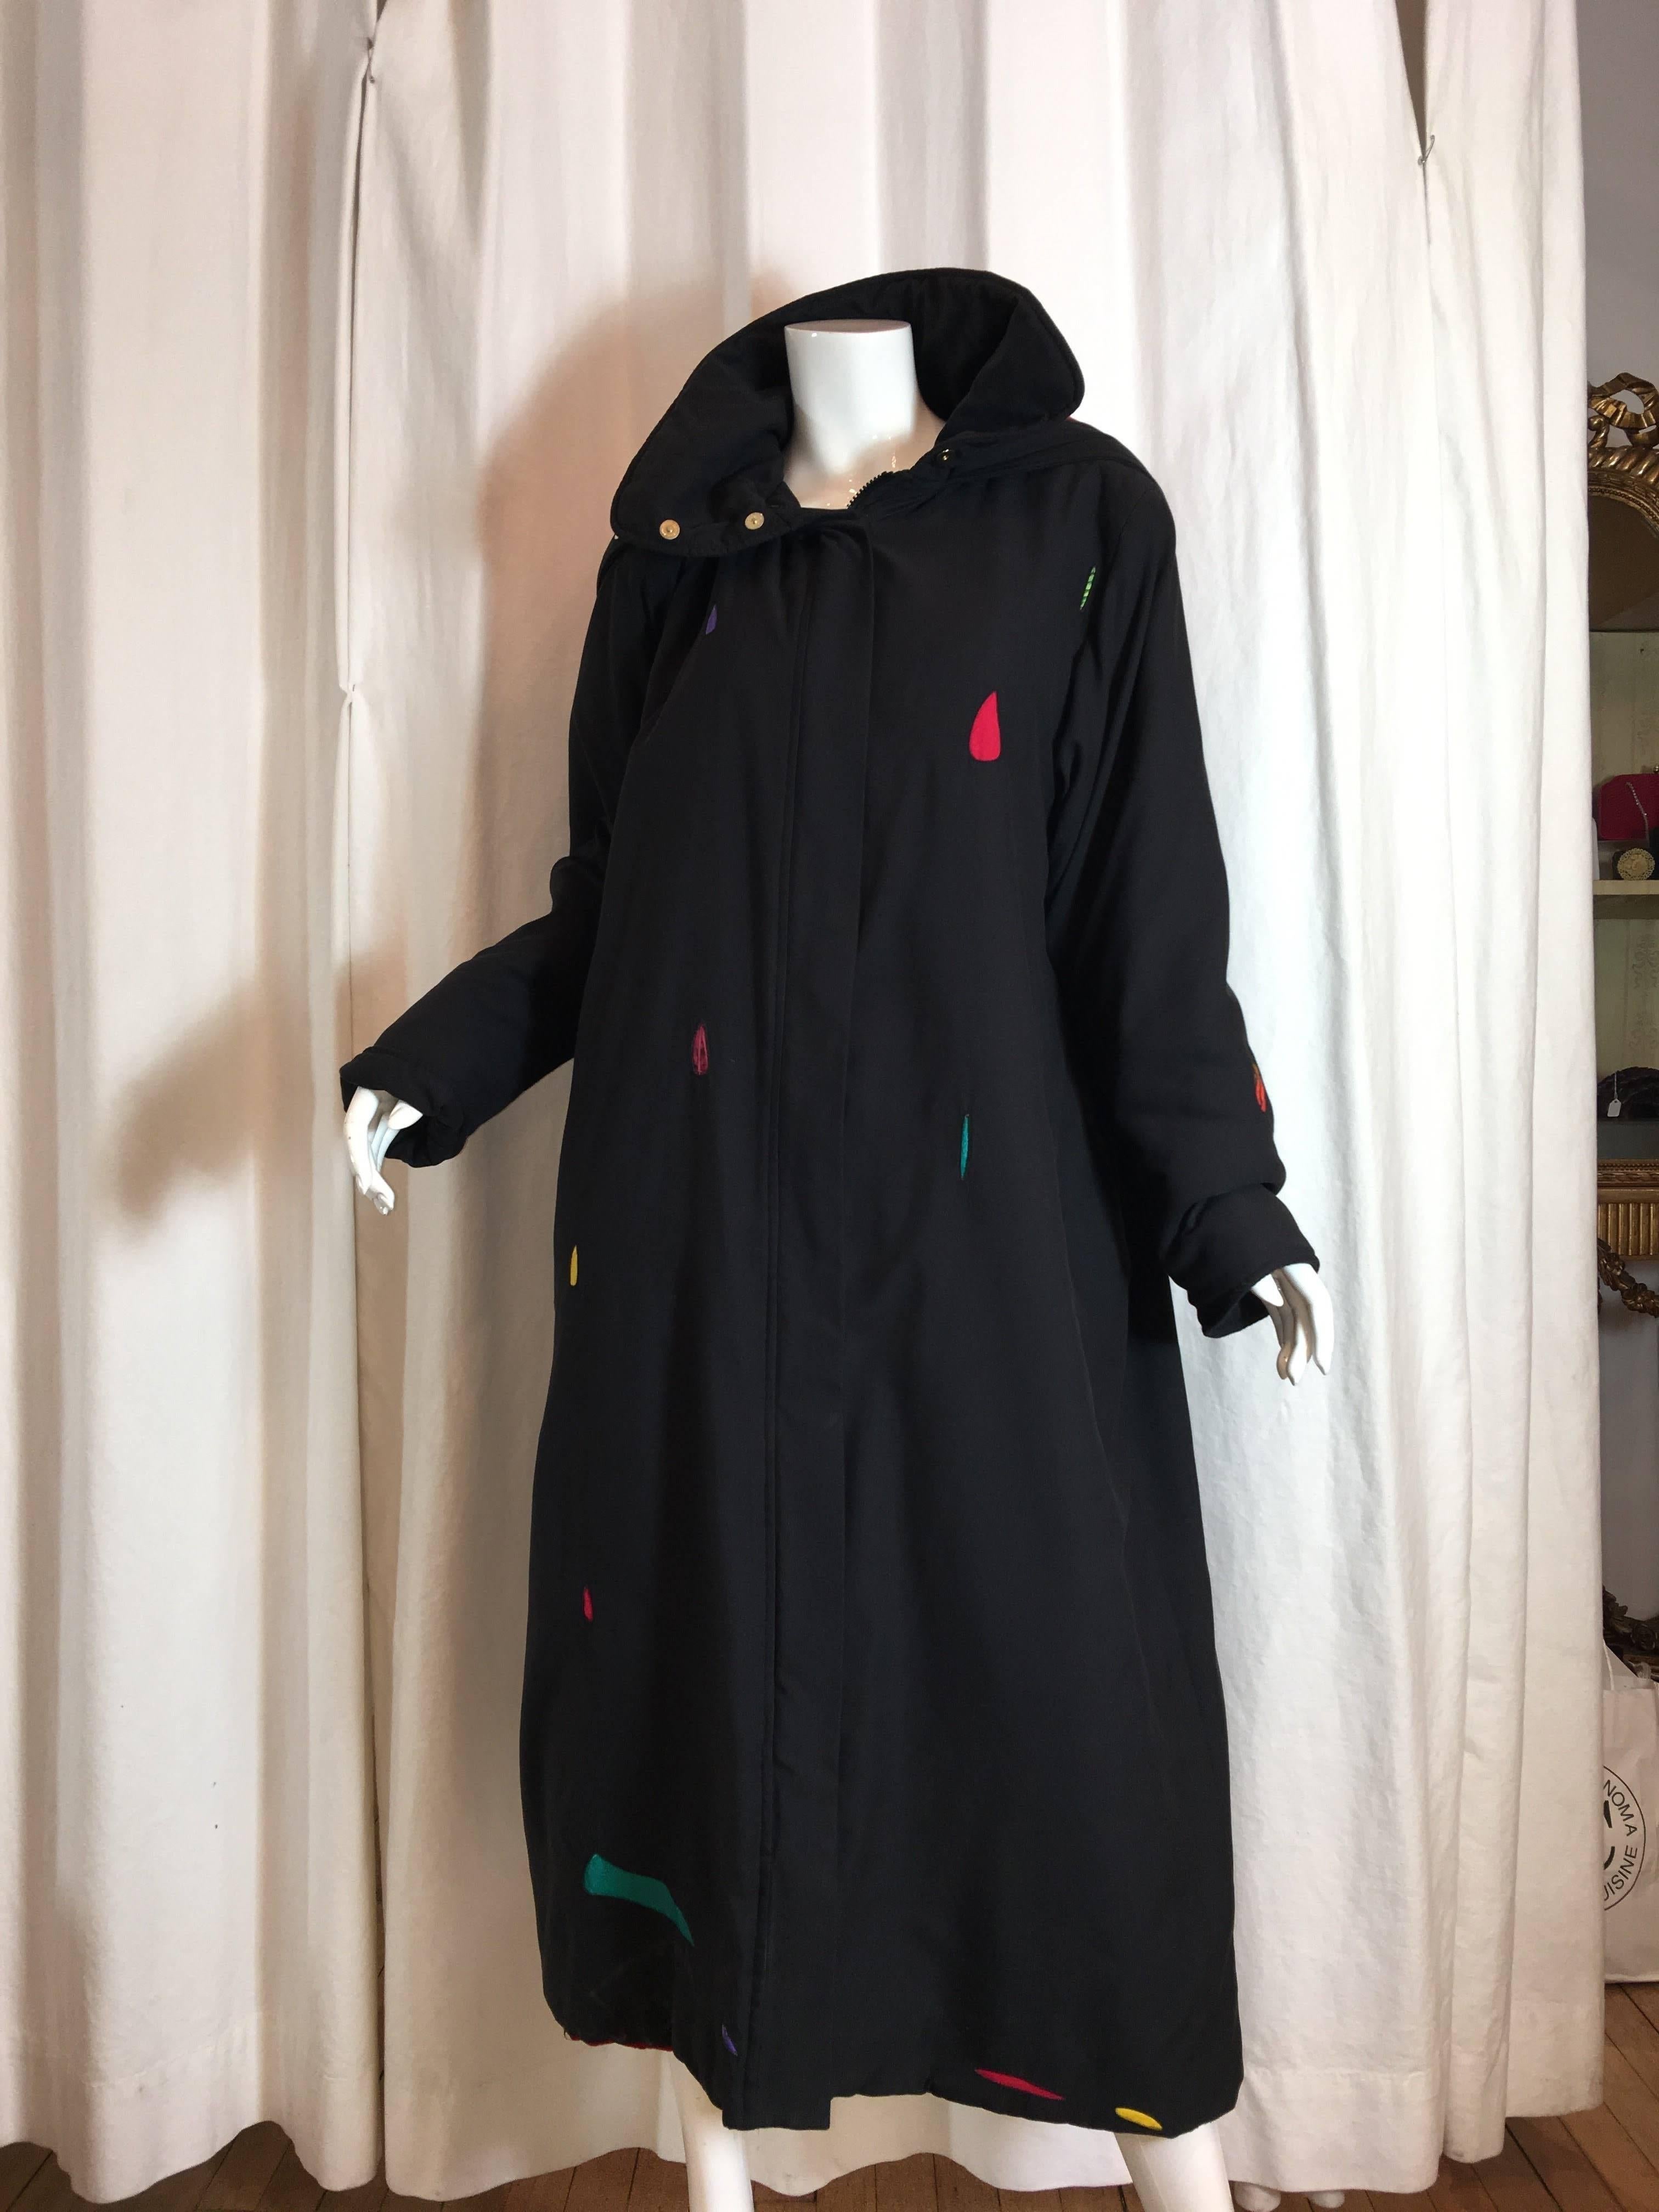 Limited Edition Floor Length Thermal Insulated Coat  eith Multi Colored Clould on Back and Multi-Colored rain drops throughout. 